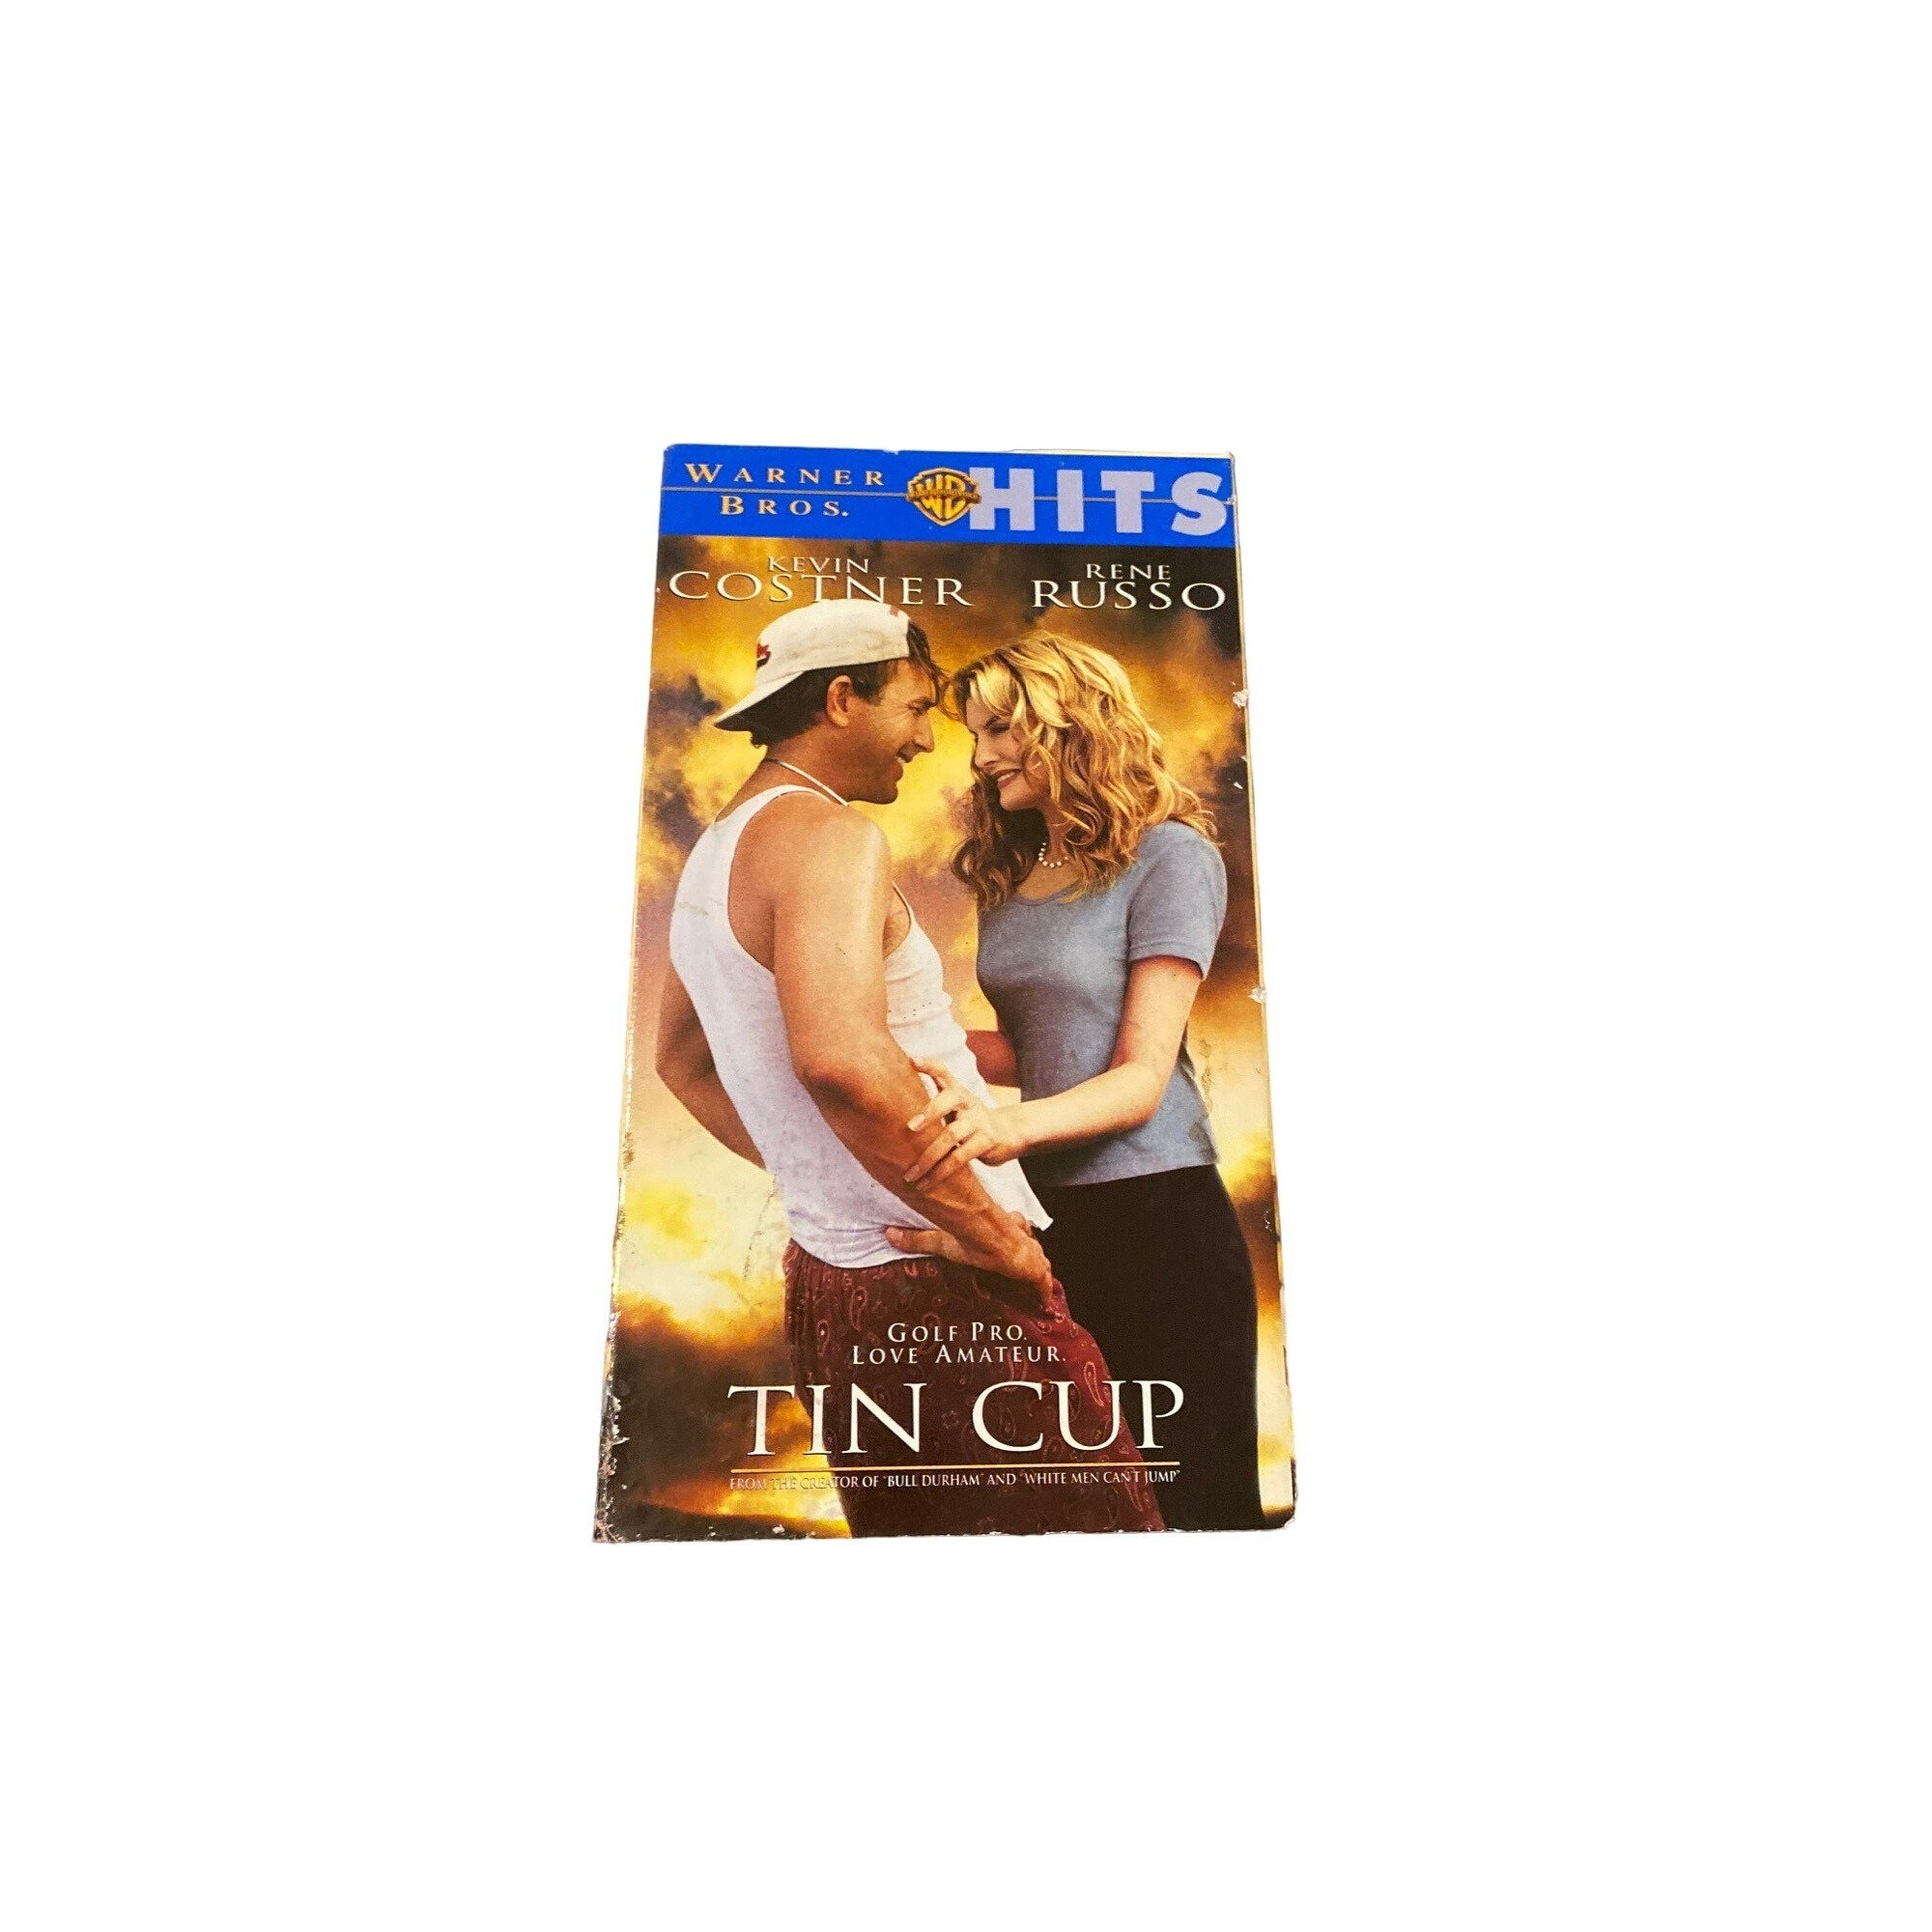 Vintage Tin Cup VHS Tape Movie